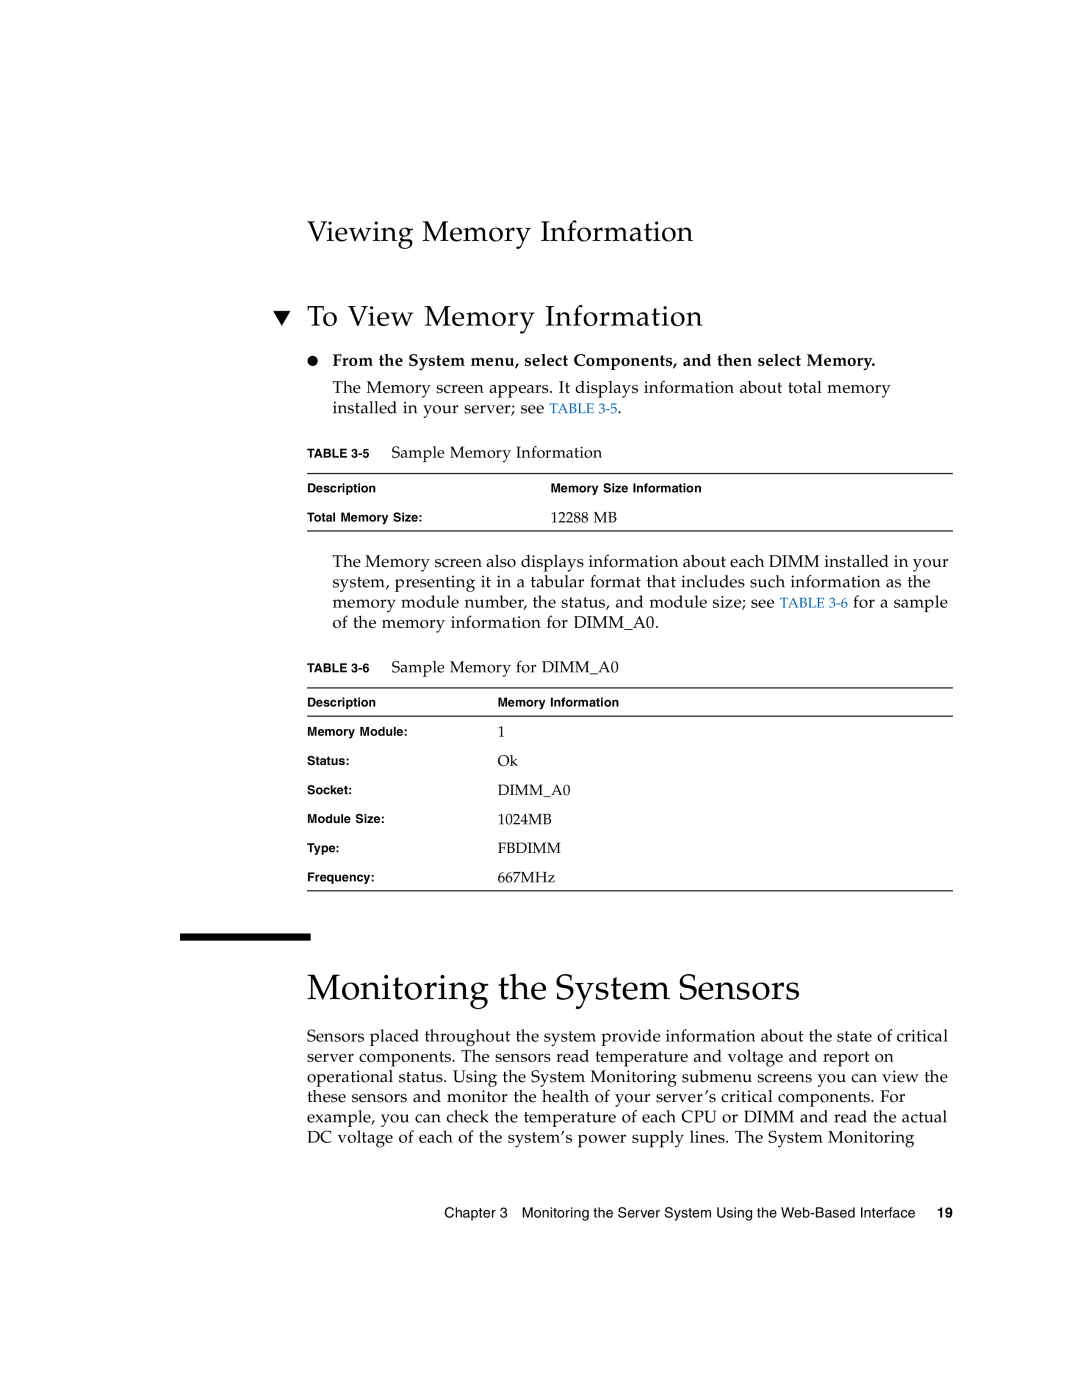 Sun Microsystems X4150 manual Monitoring the System Sensors, Viewing Memory Information To View Memory Information 